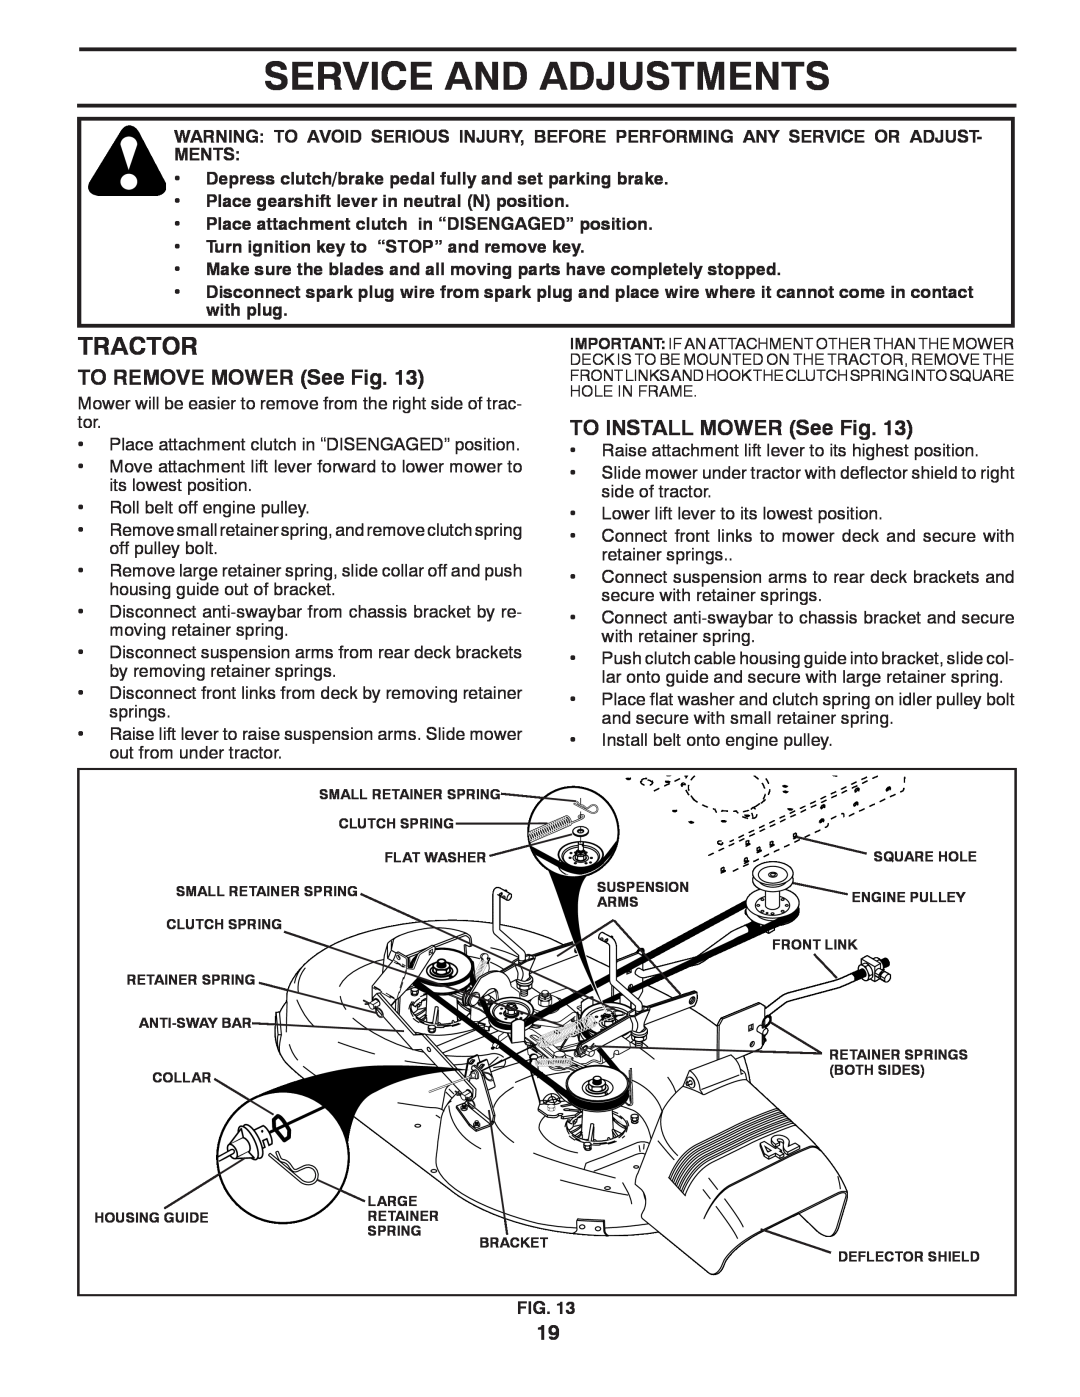 Murray 96017000700 manual Service And Adjustments, TO REMOVE MOWER See Fig, TO INSTALL MOWER See Fig, Tractor 